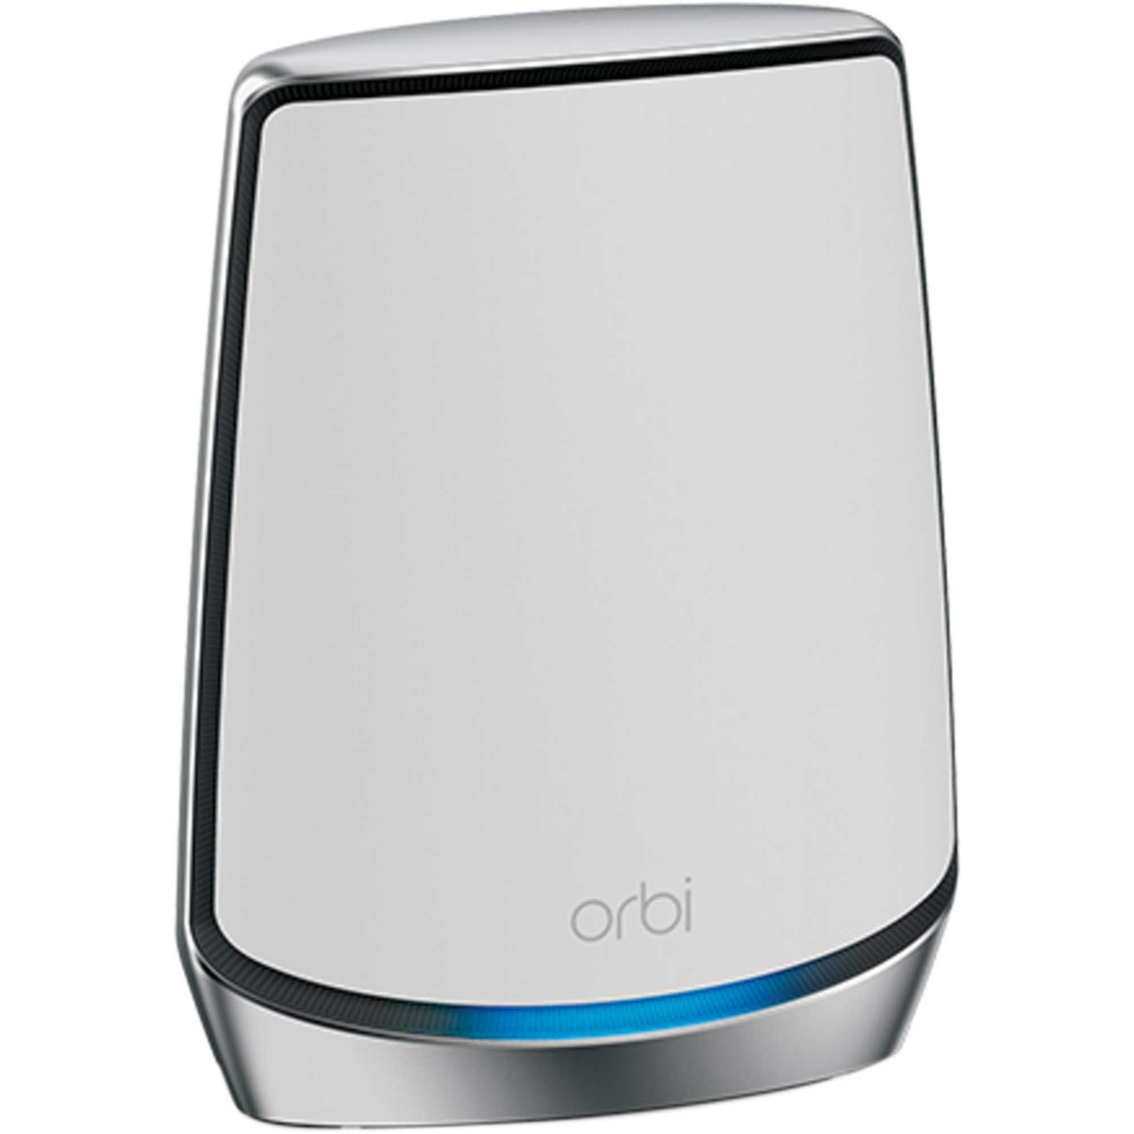 Netgear Orbi Tri-Band WiFi 6 Mesh System Router with 1 Satellite Extender - Image 4 of 5